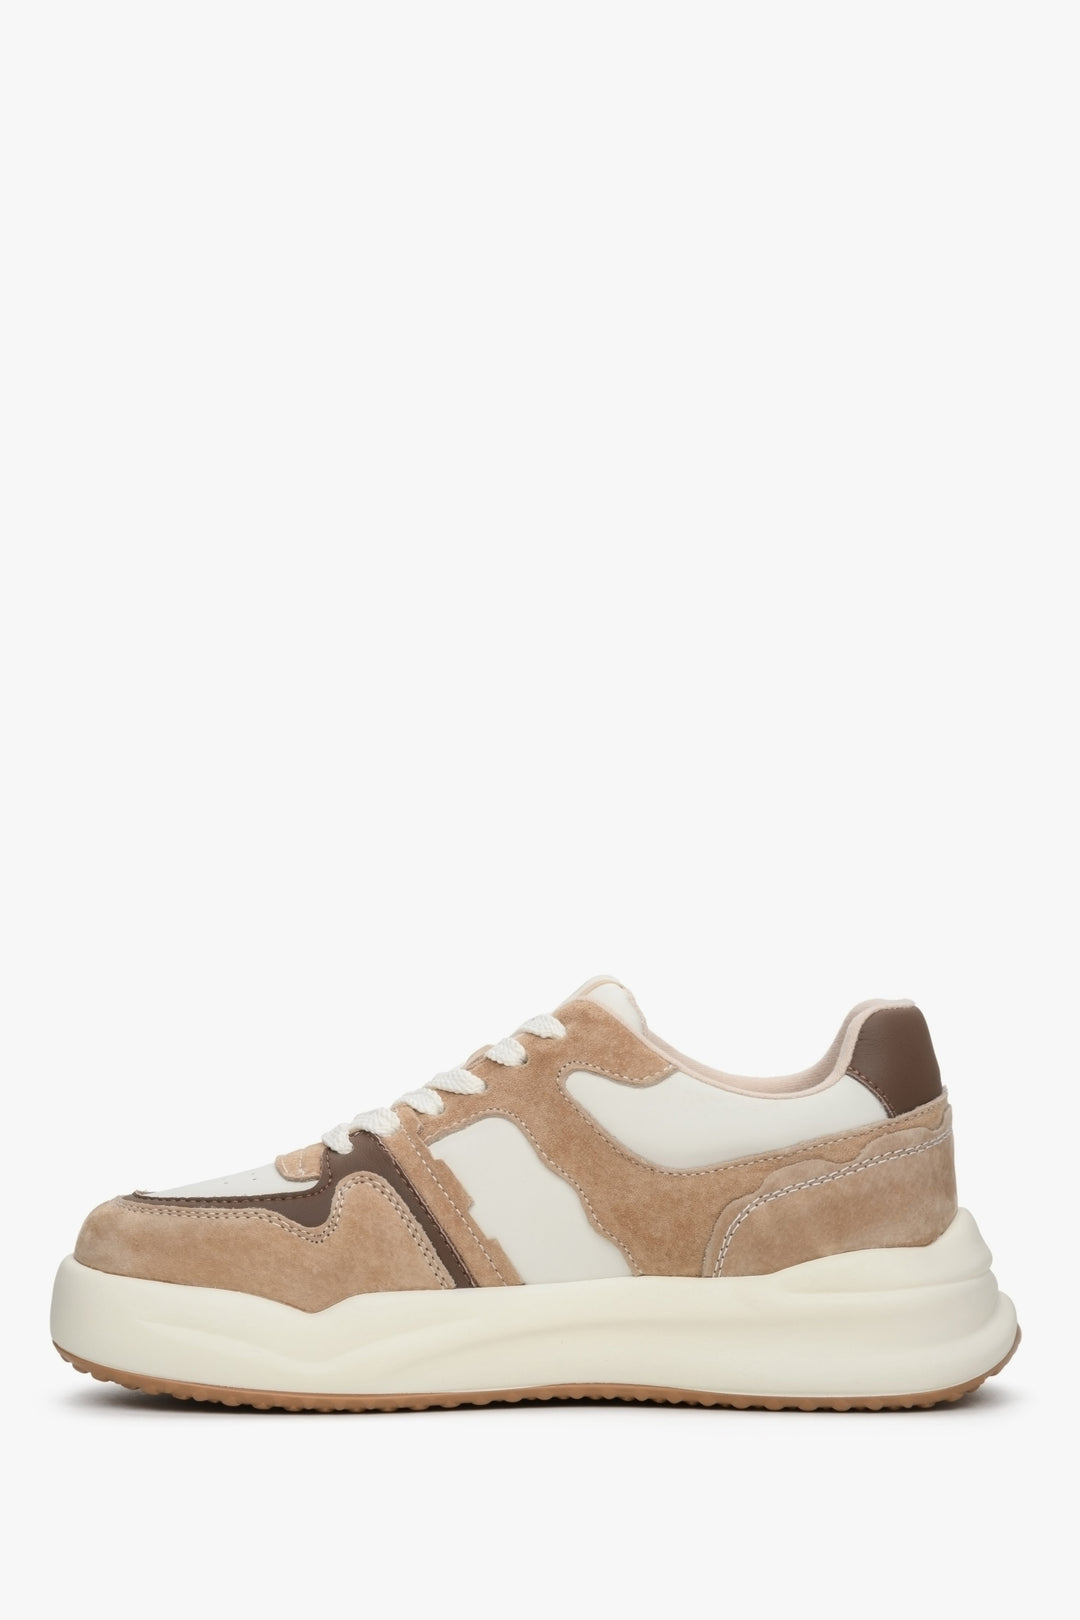 Women's beige and white sneakers made of leather and velour.